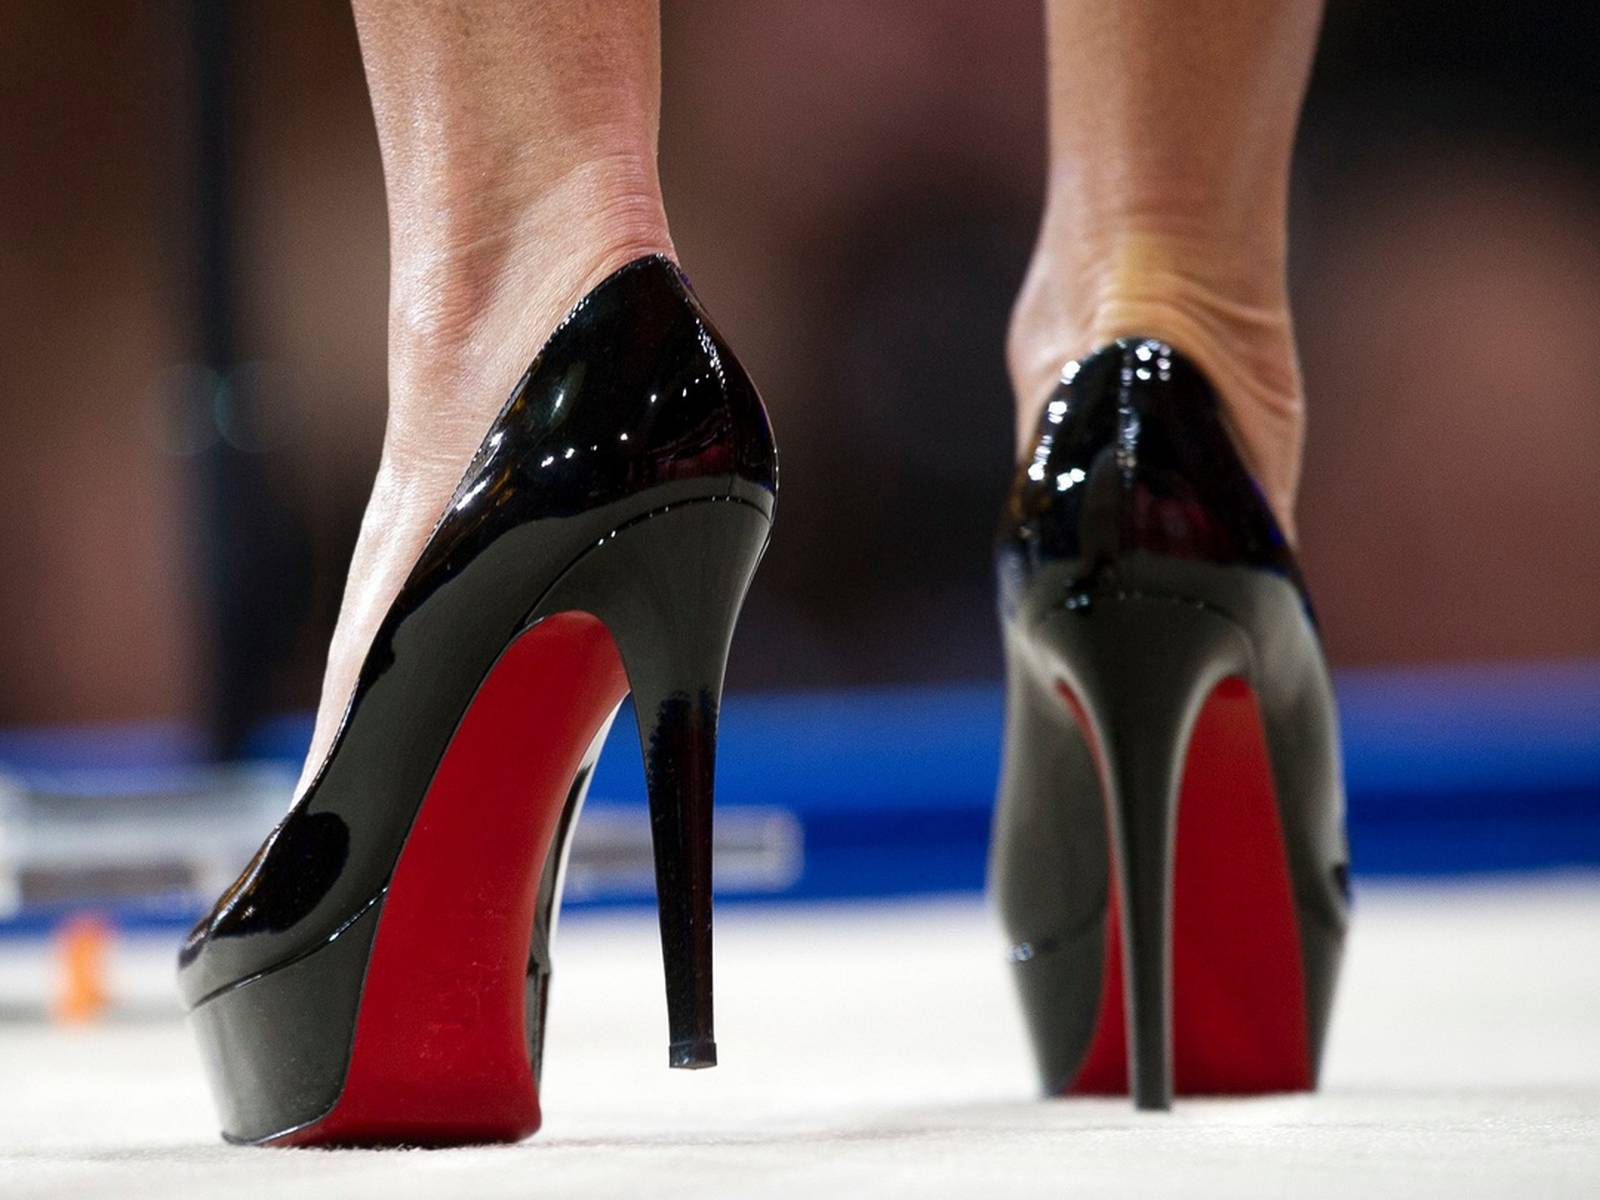 In the battle over his sole, Louboutin loses a round